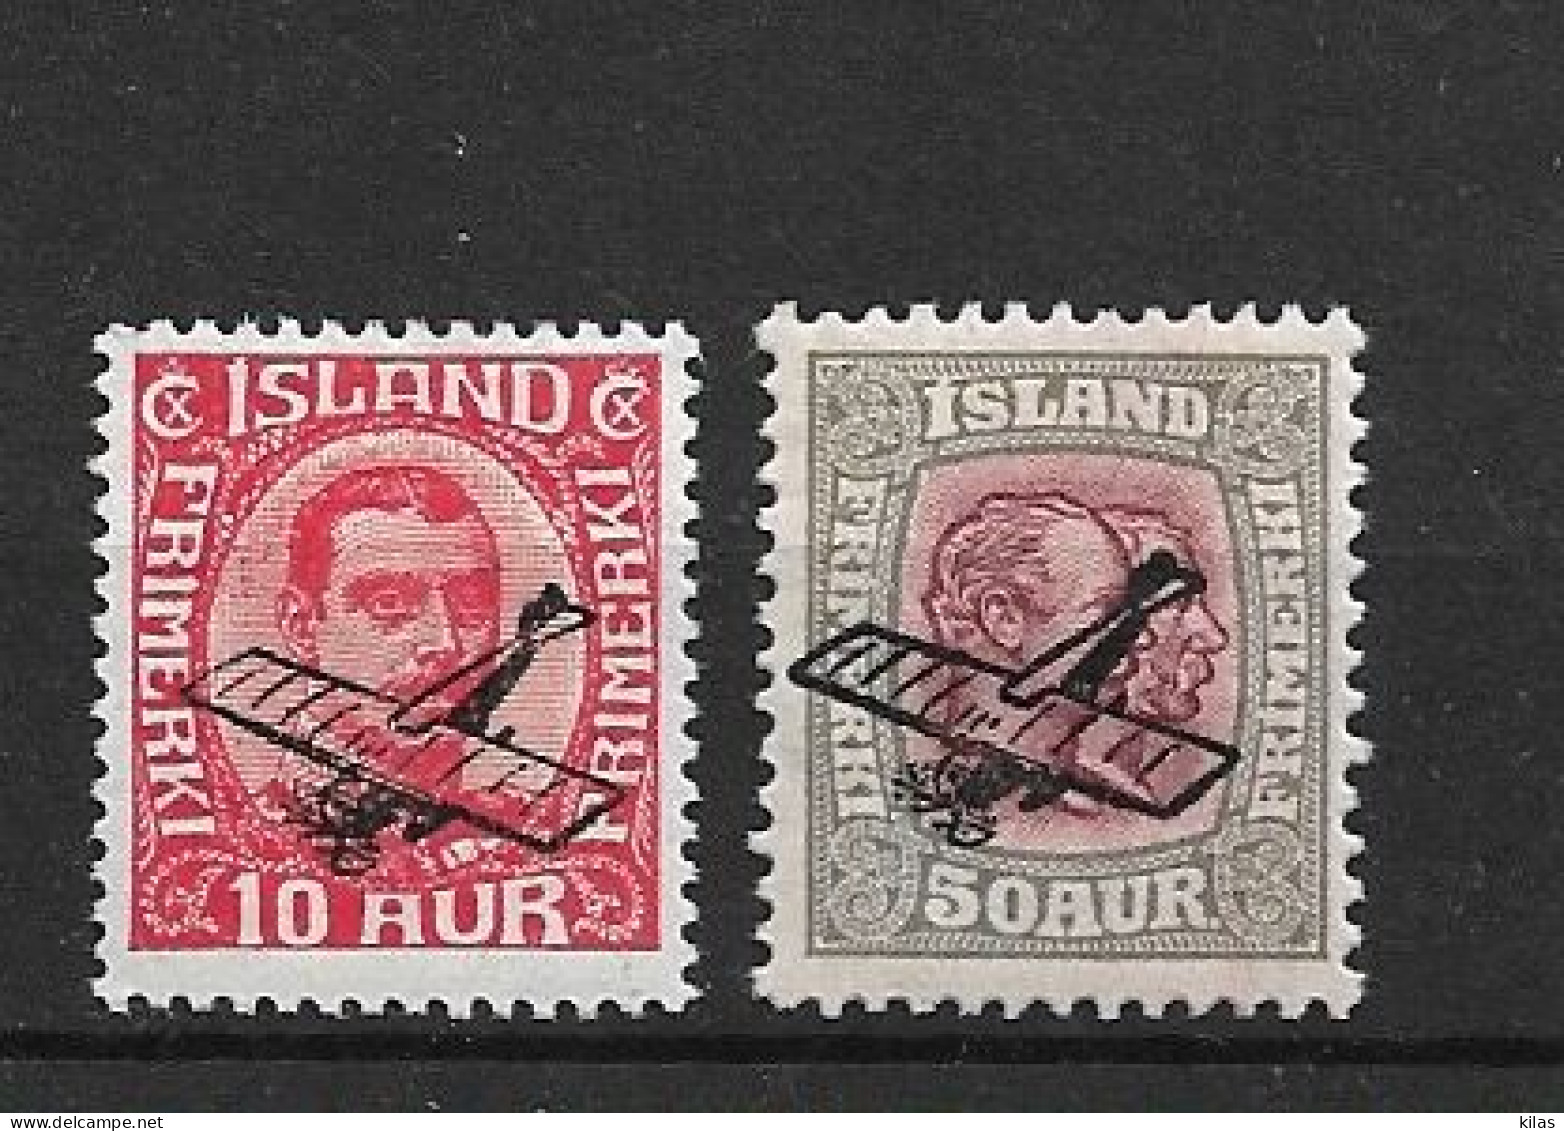 ICELAND 1928 Airmail Overprint MH - Luftpost